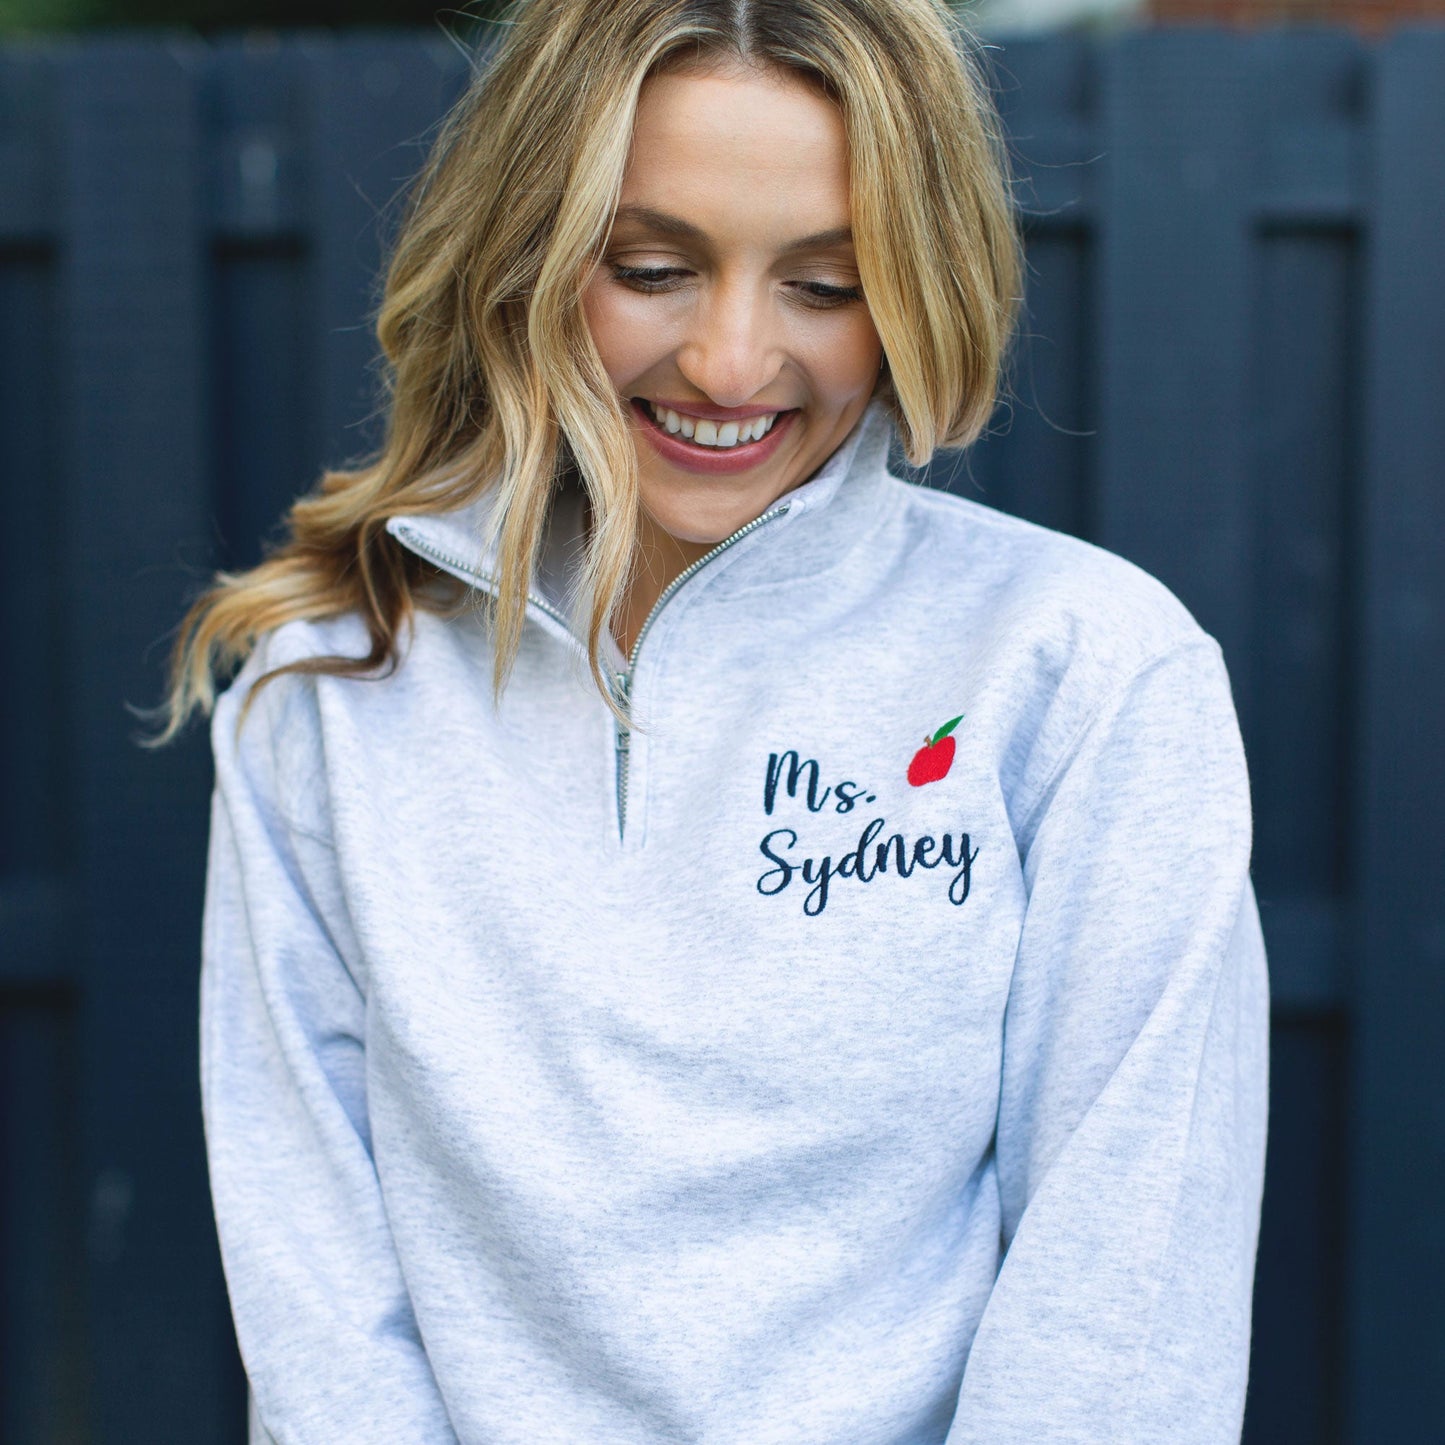 Woman wearing ash gray quarter zip sweatshirt with teacher name and mini apple embroidery